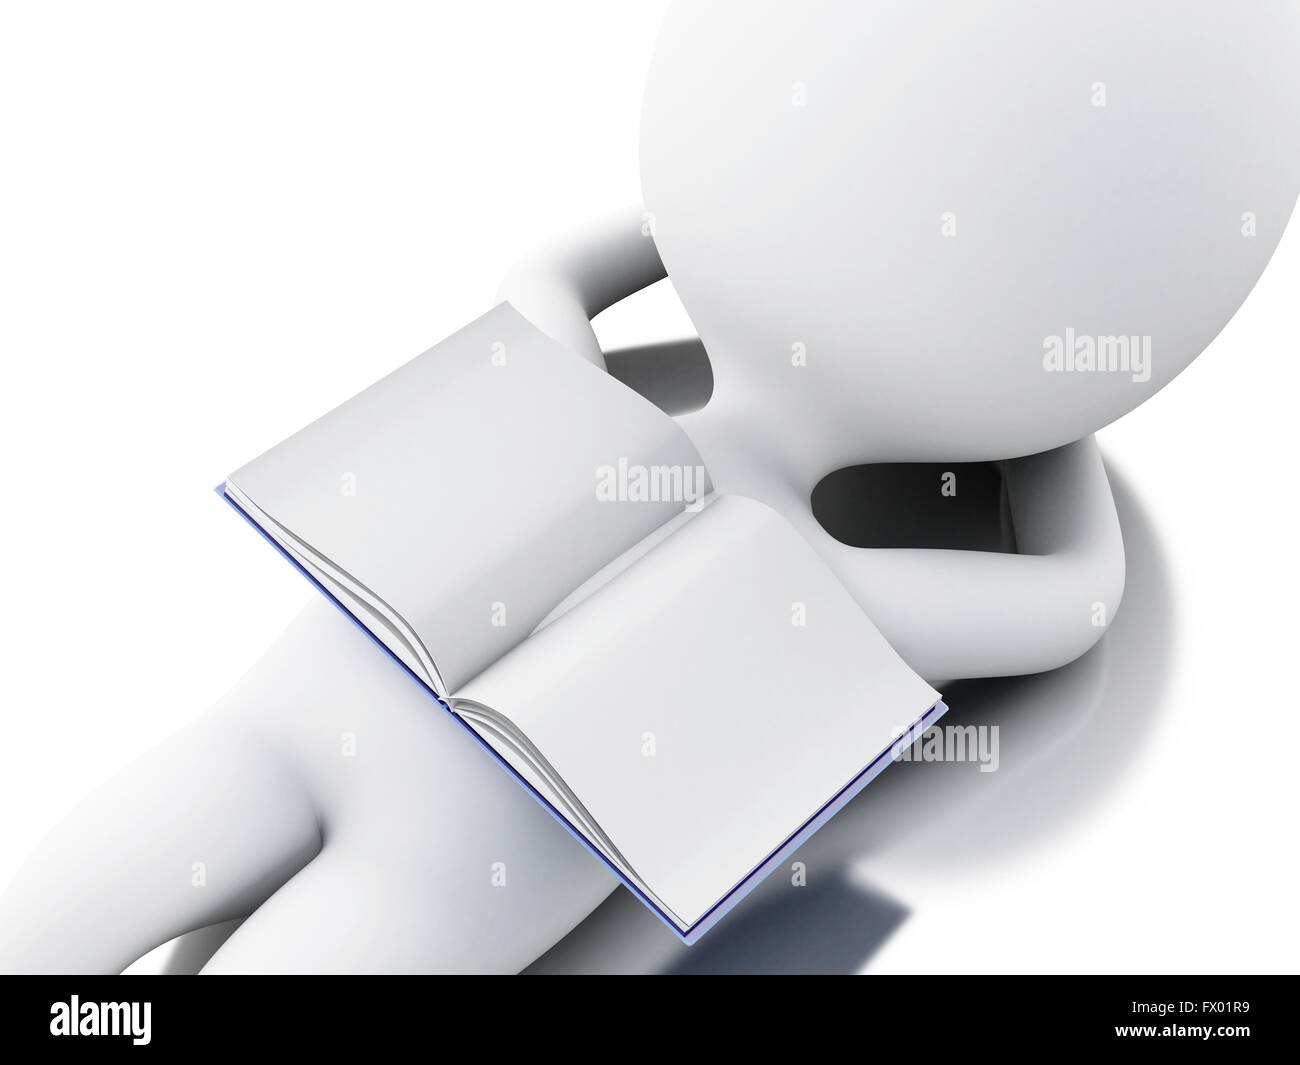 3D Illustration. White people relaxing and reading a book. Isolated white background. Stock Photo